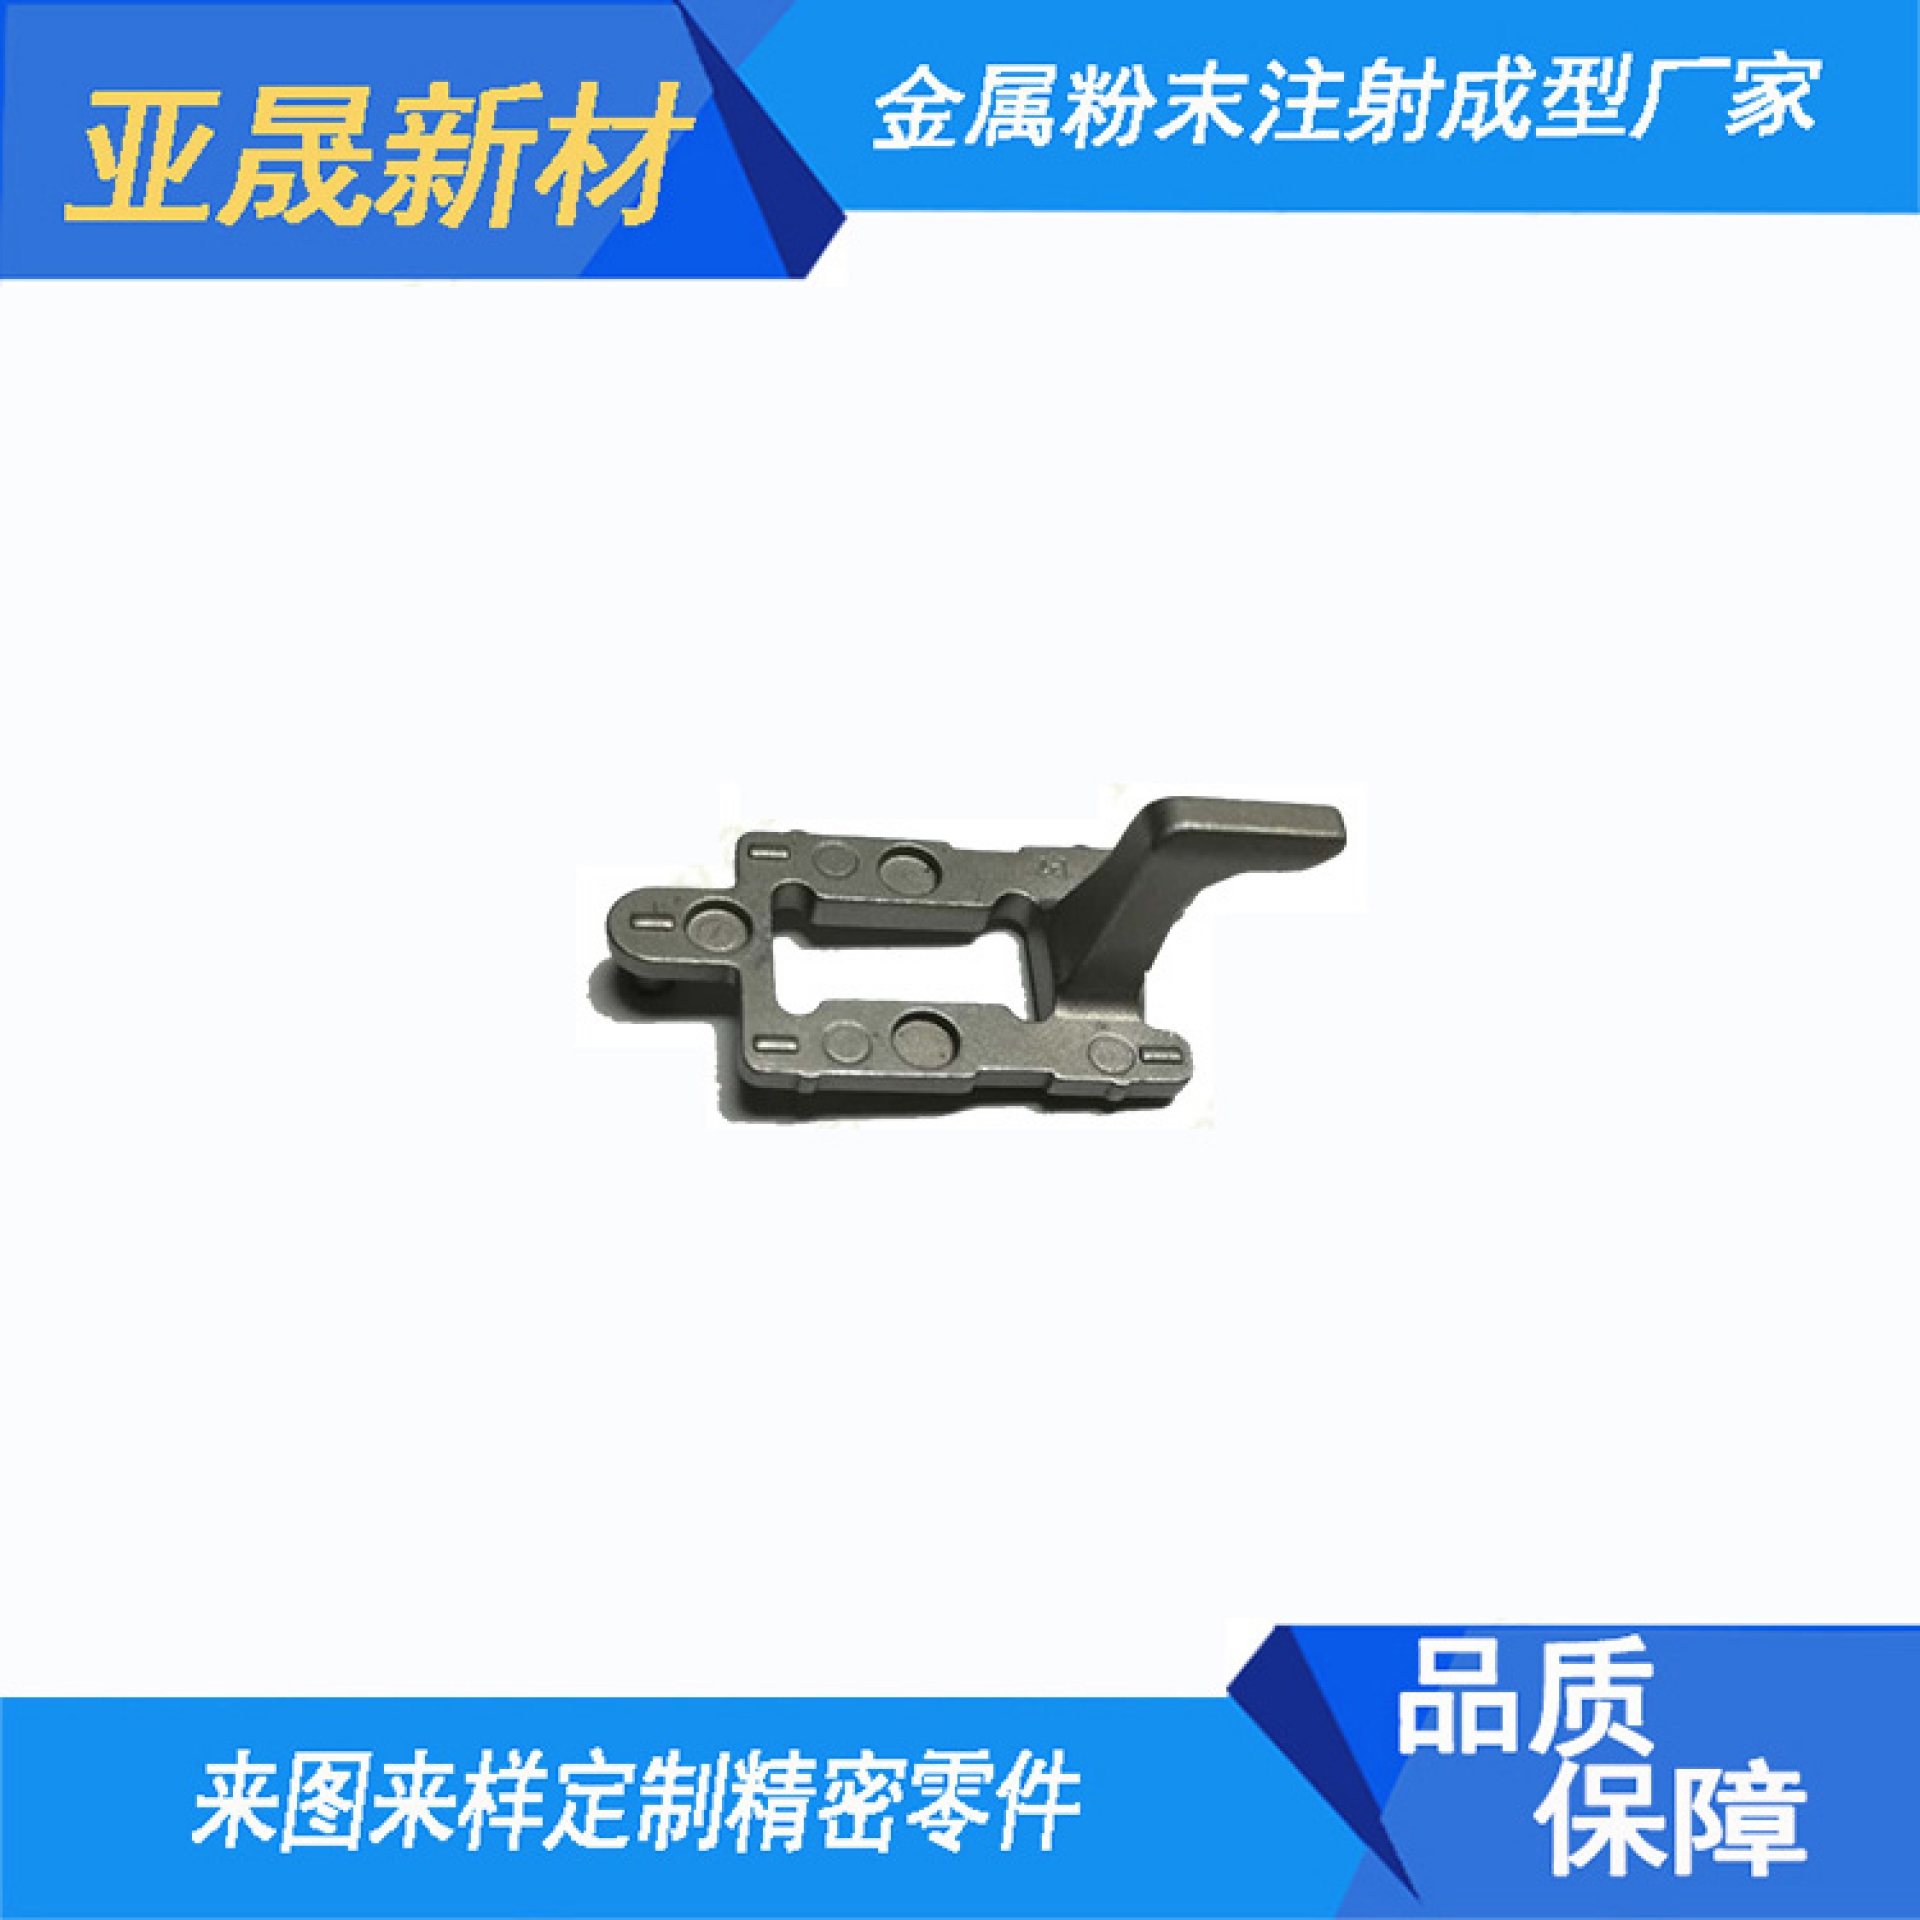 Stainless Steel Powder Injection Molding